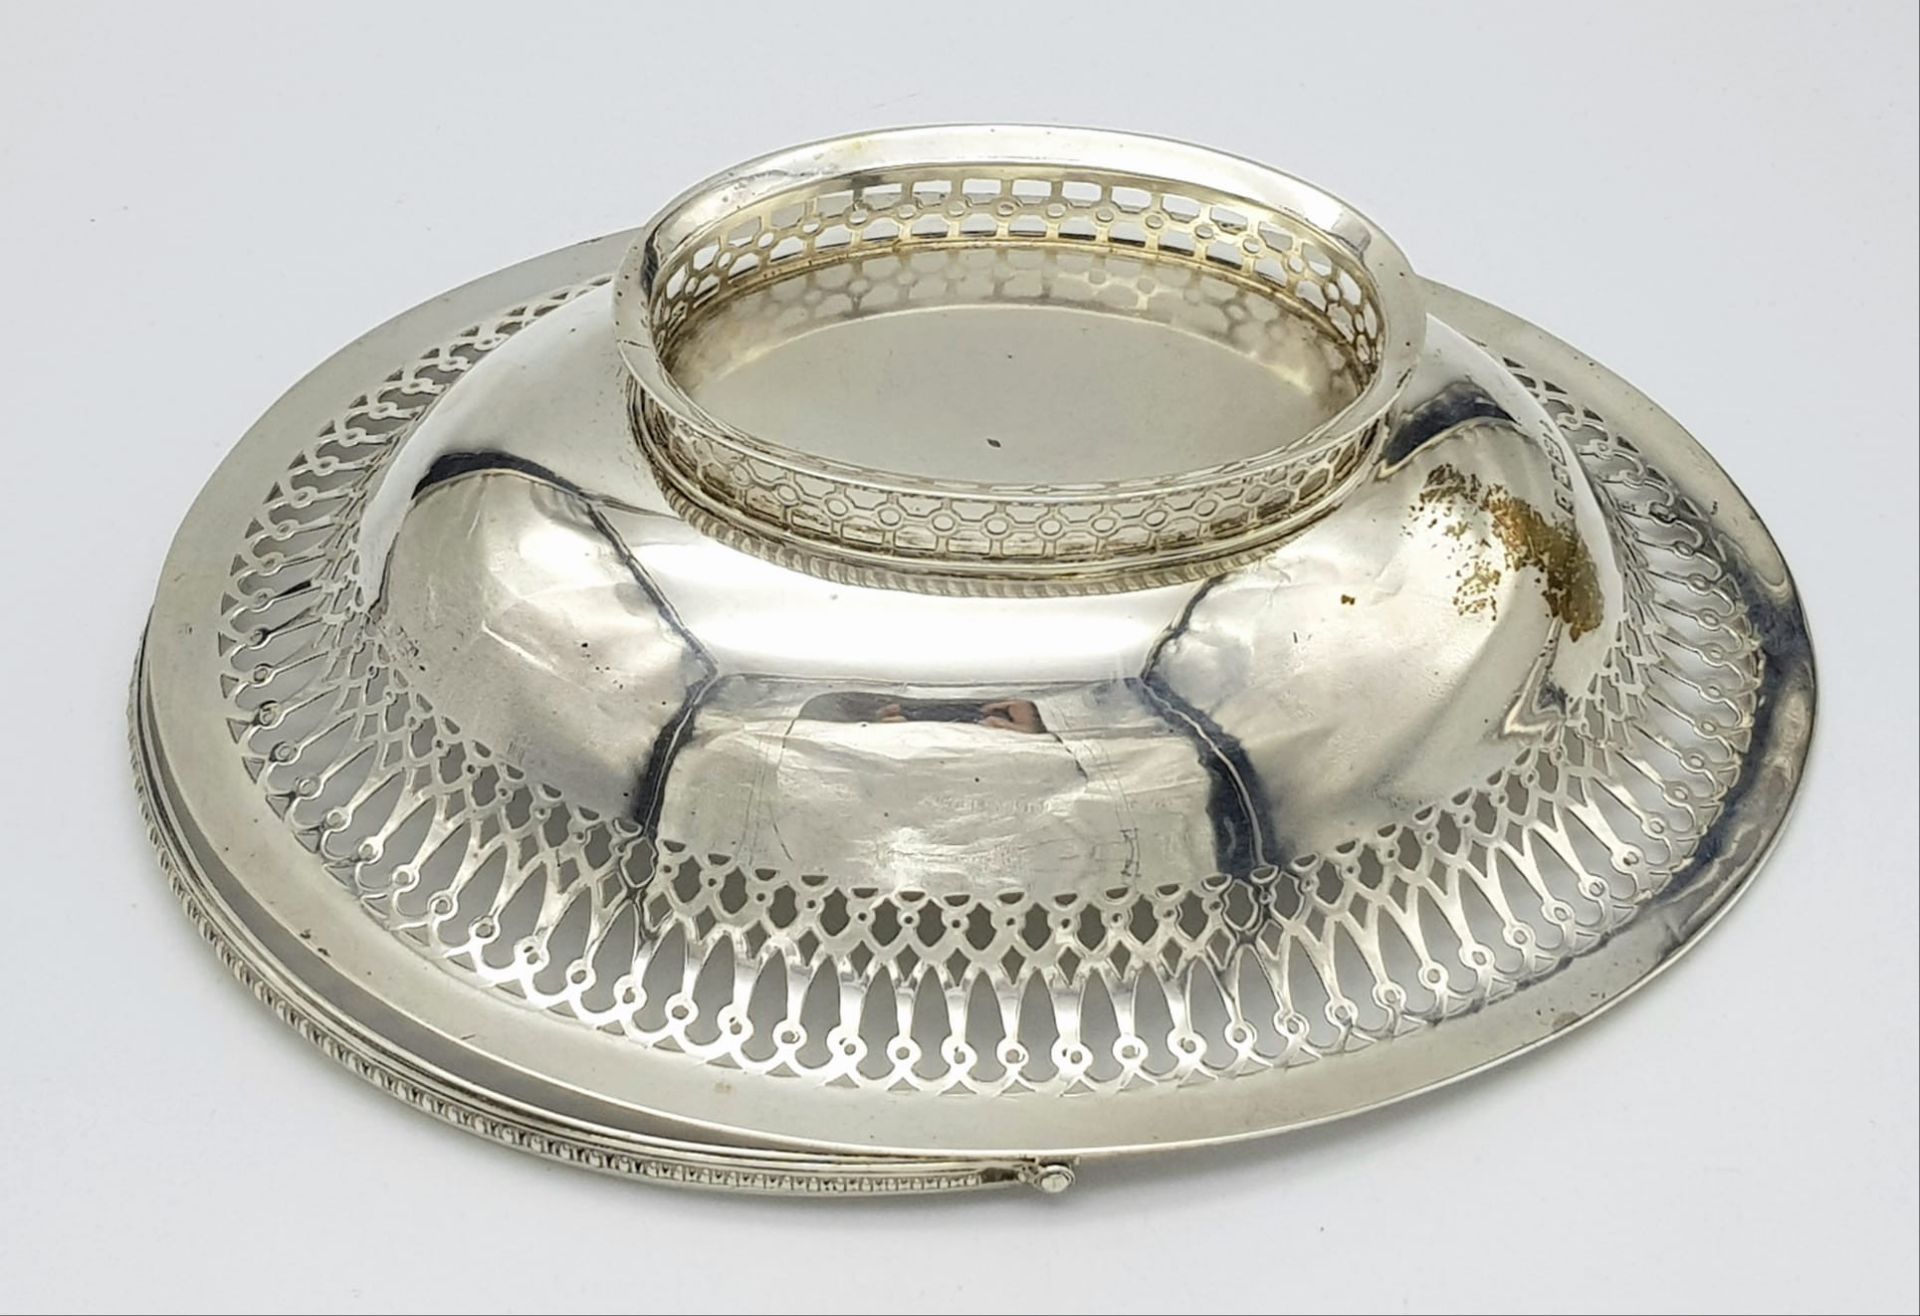 An Antique Sterling Silver Oval Swing Handled Cake/Bread Basket. Pierced geometric and beaded - Image 9 of 9